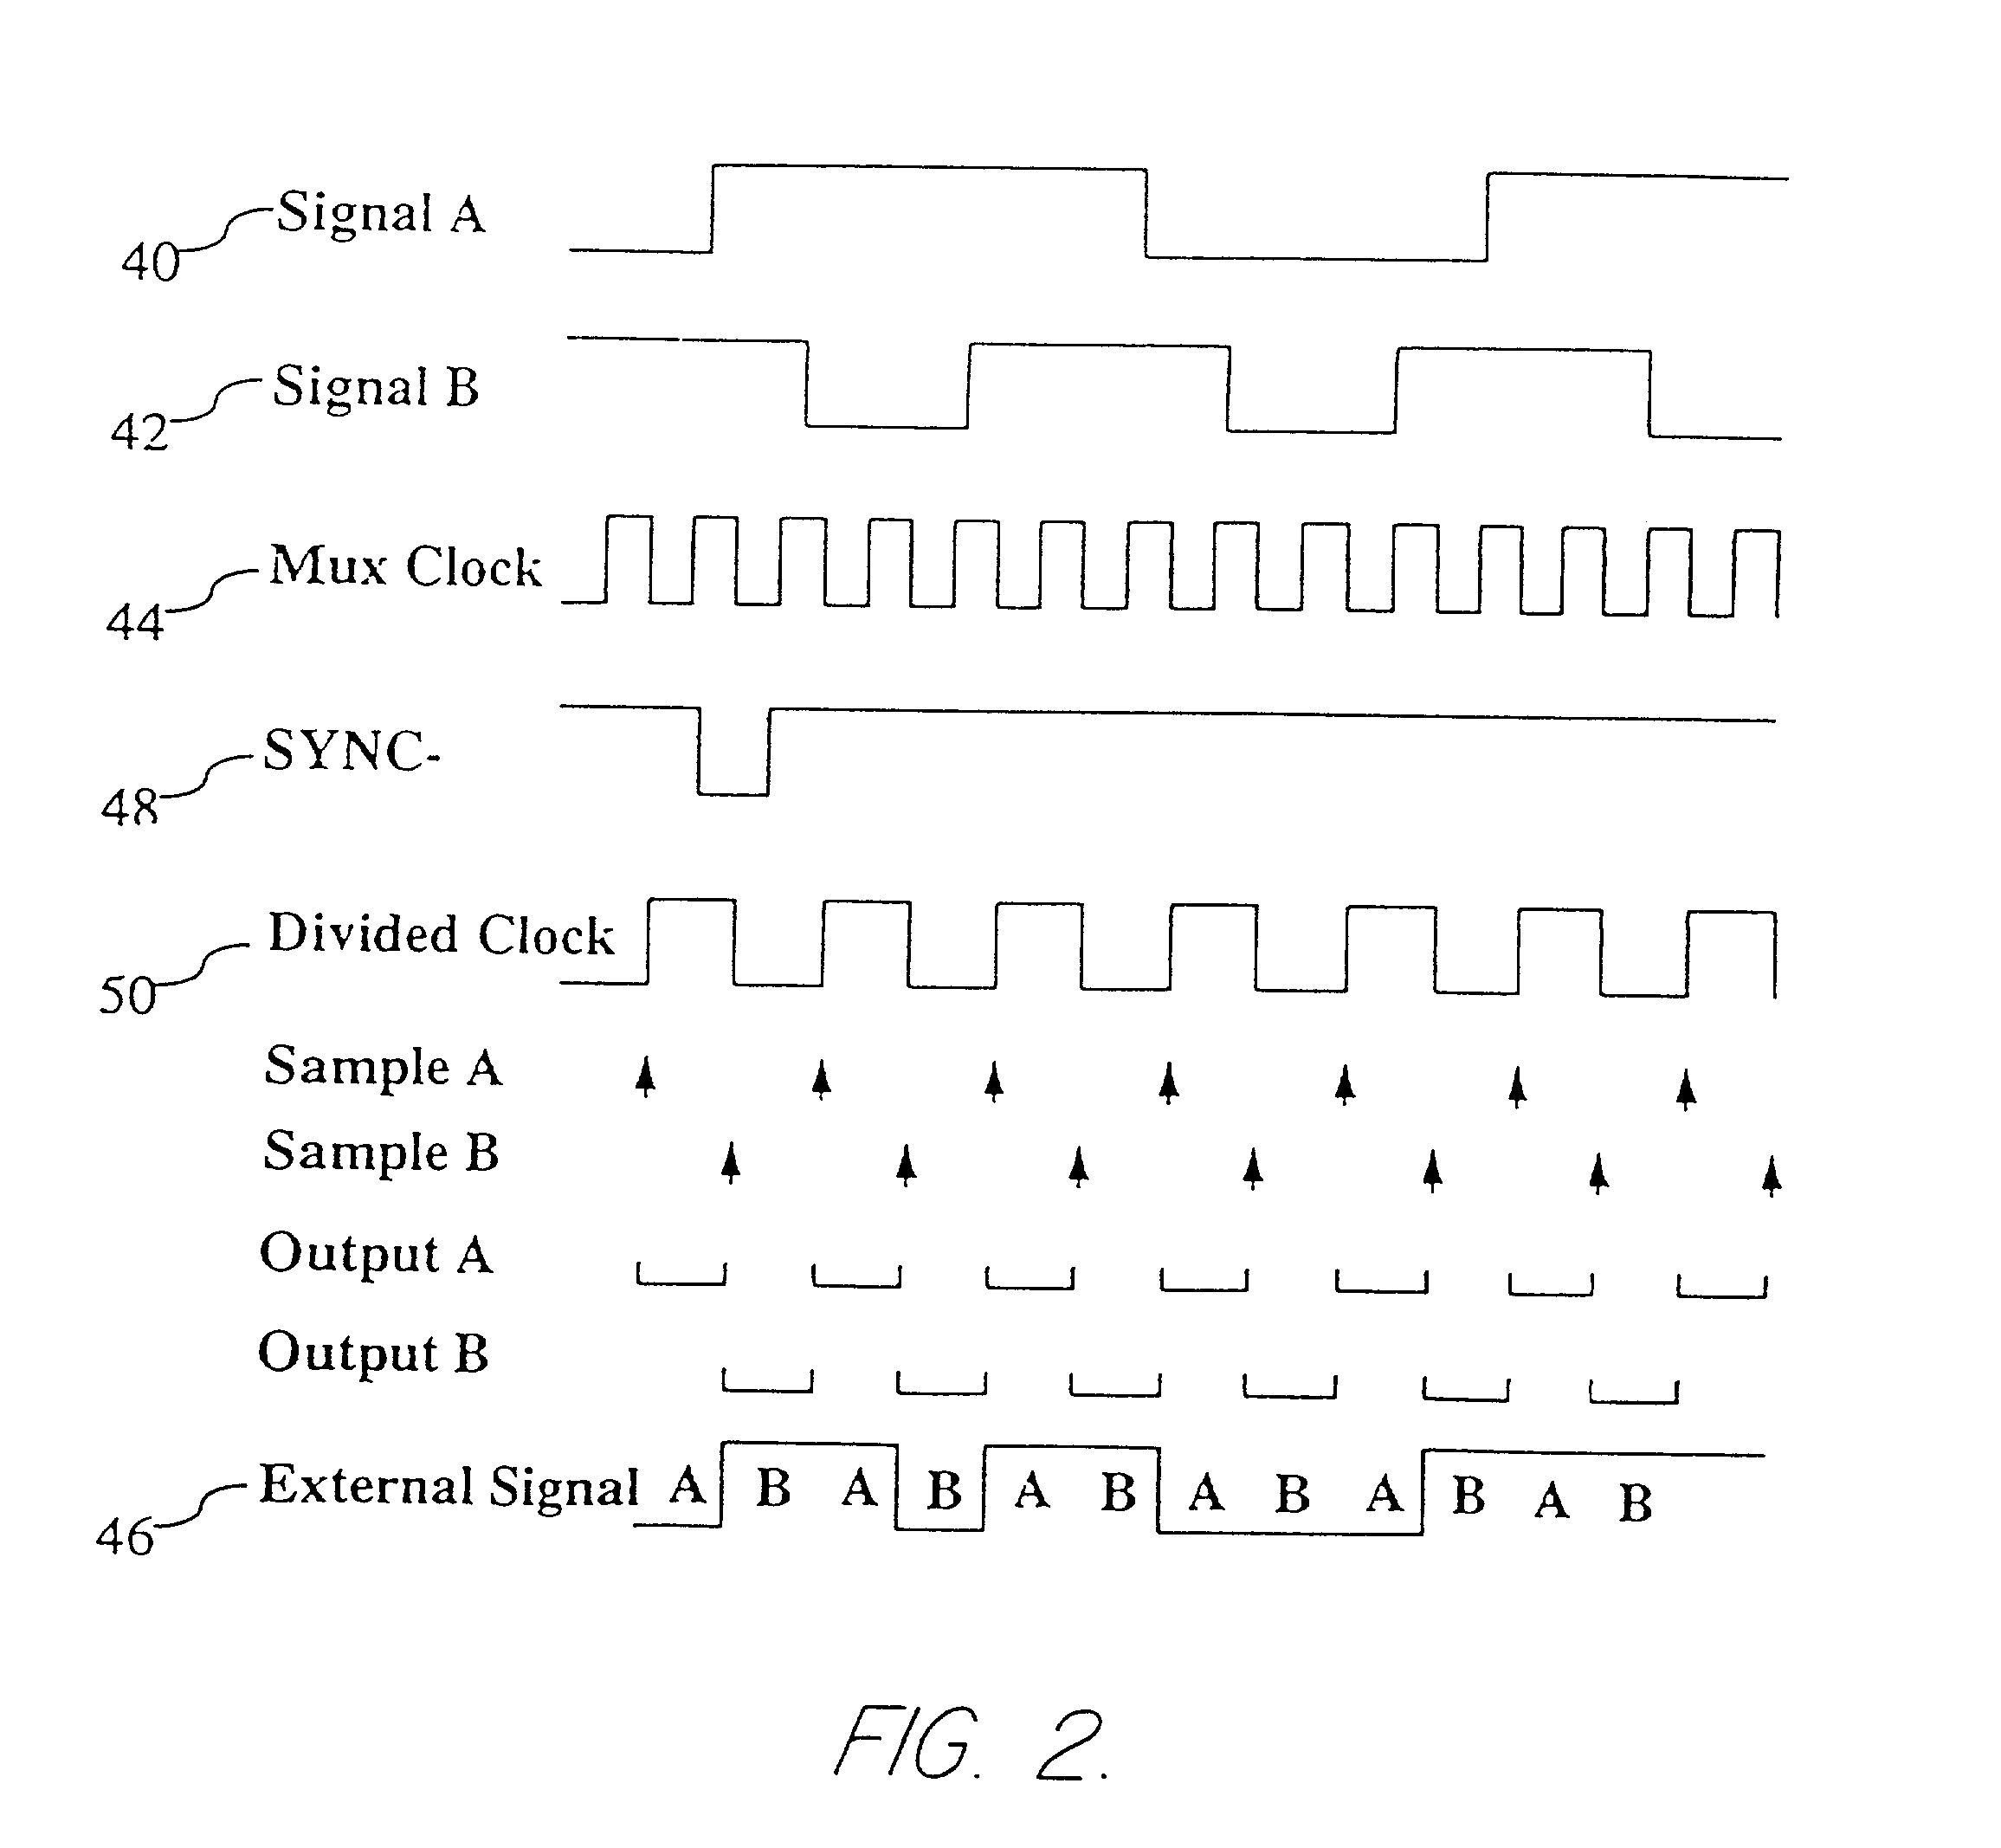 Emulation system with time-multiplexed interconnect